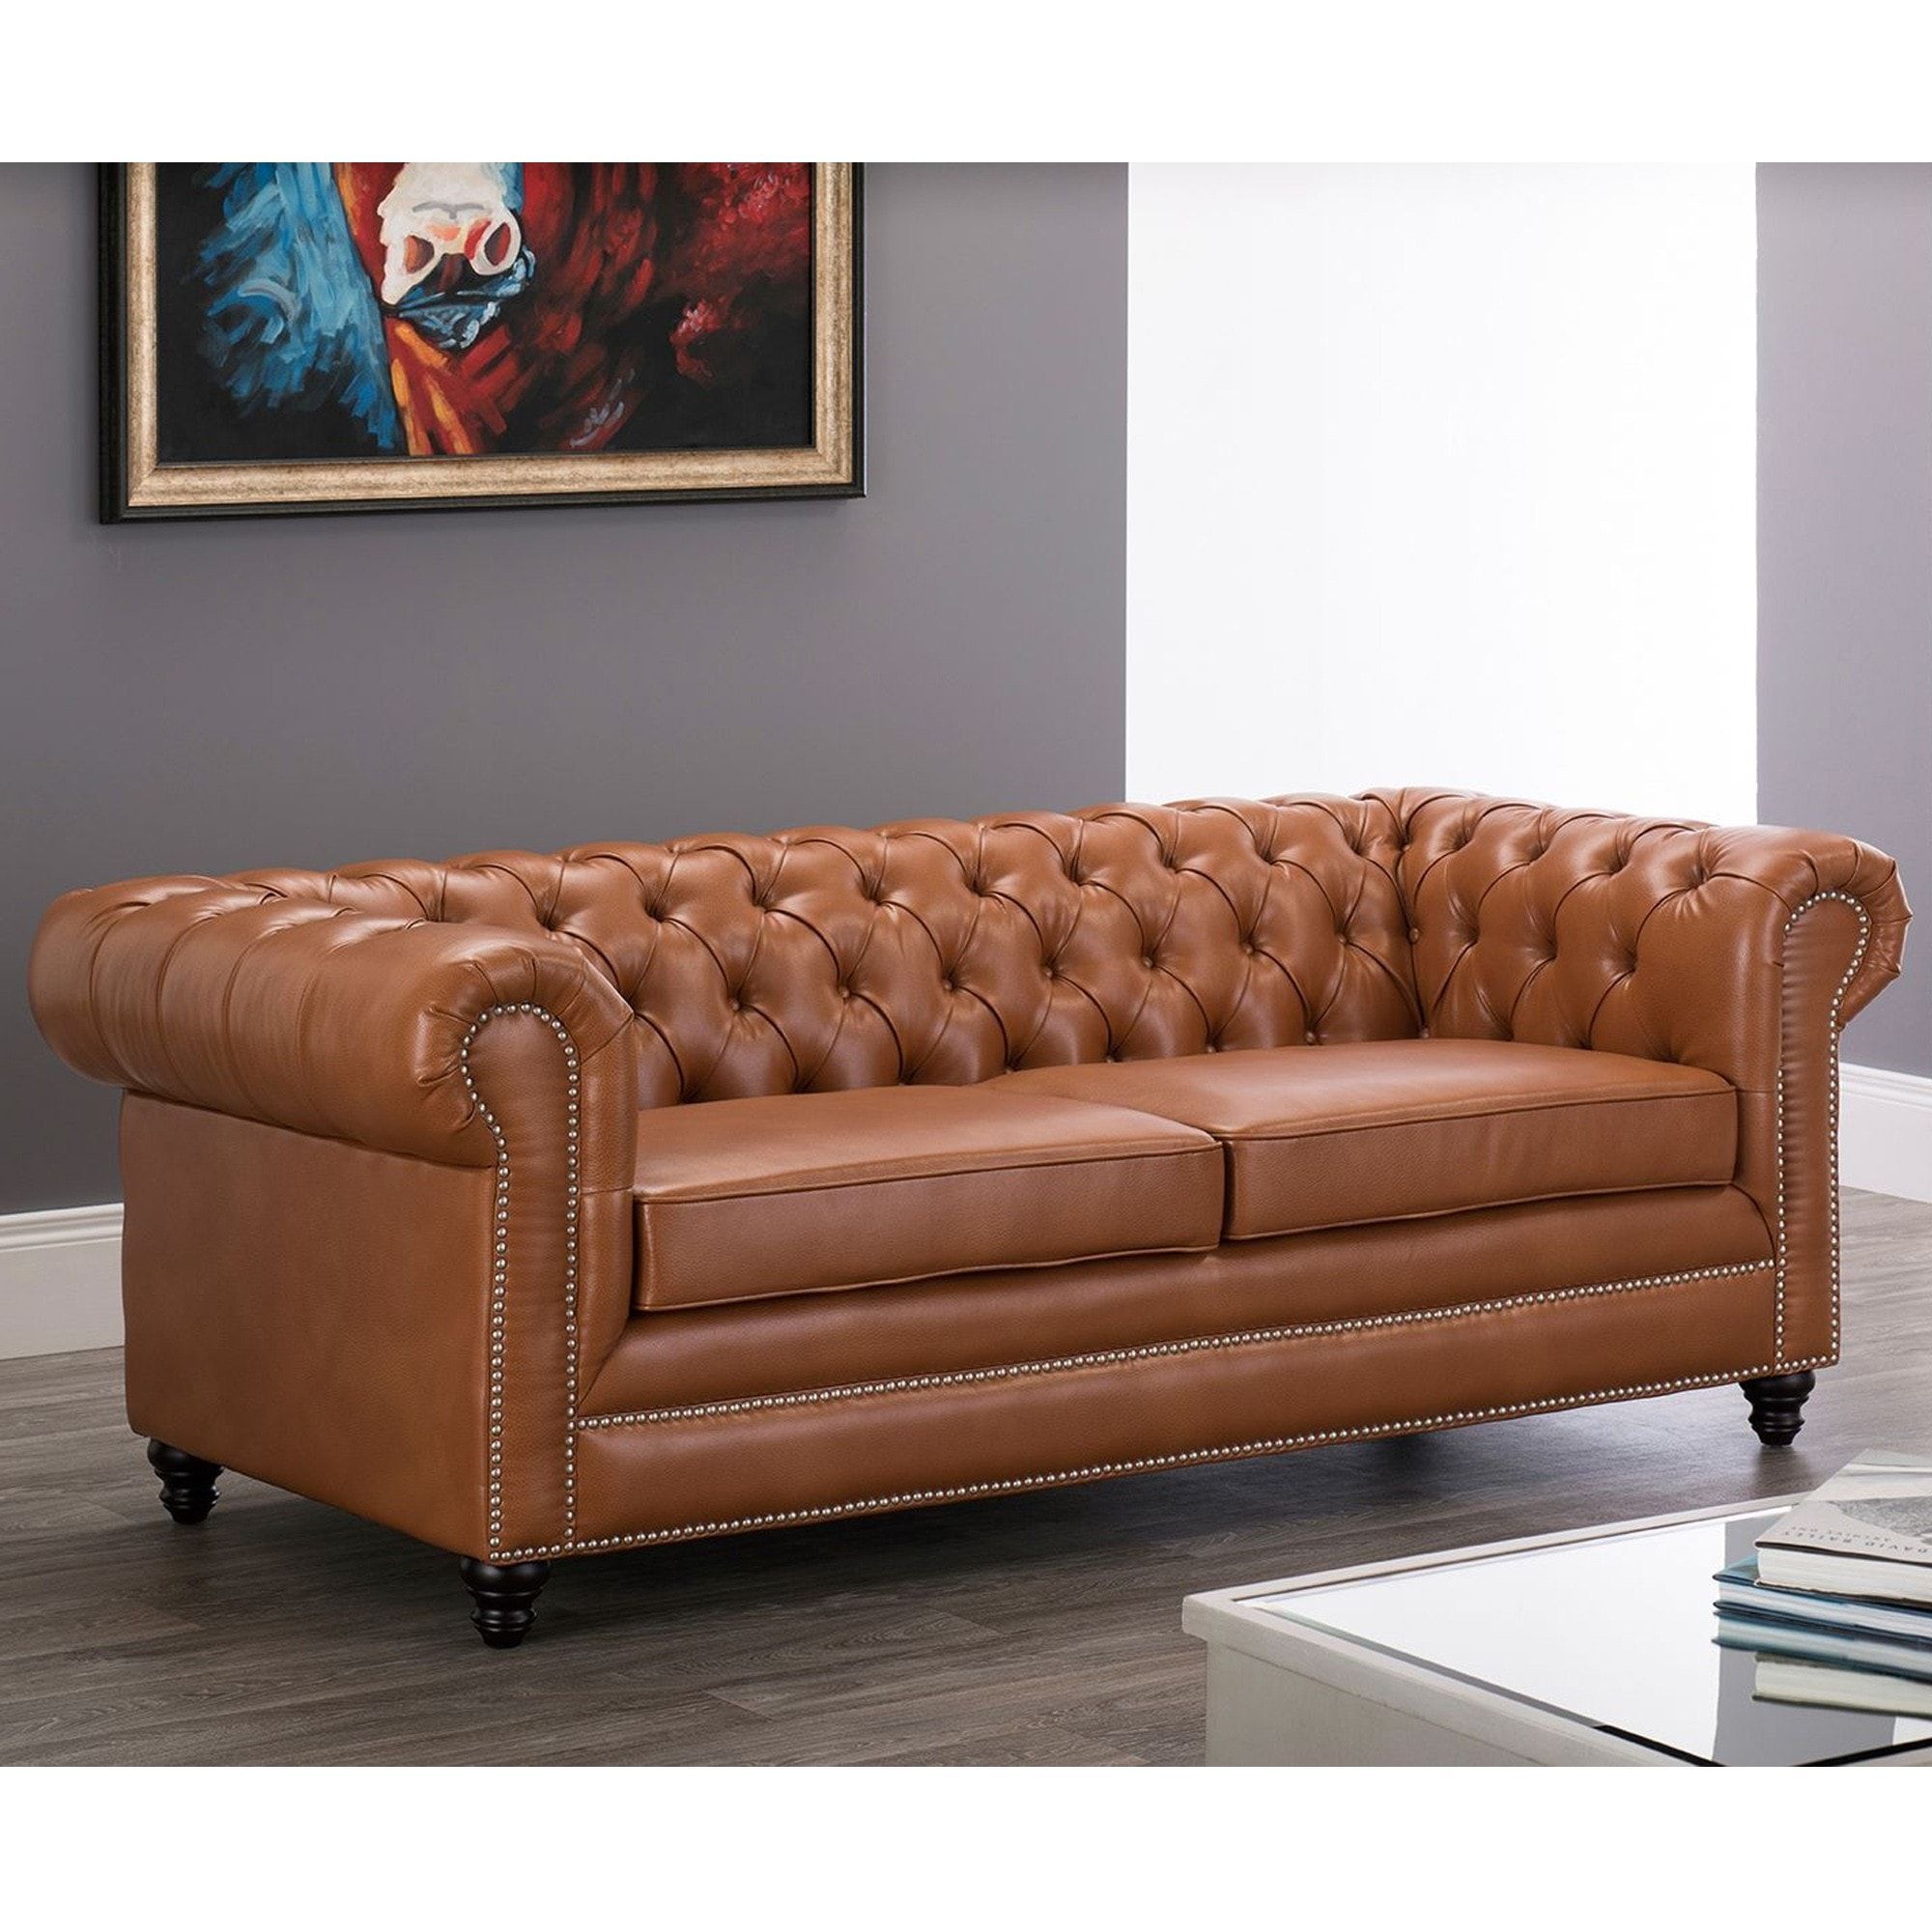 Faux Leather Chesterfield 3 Seater Sofa Tan | Tan Chesterfield Sofa For Traditional 3 Seater Faux Leather Sofas (View 2 of 20)